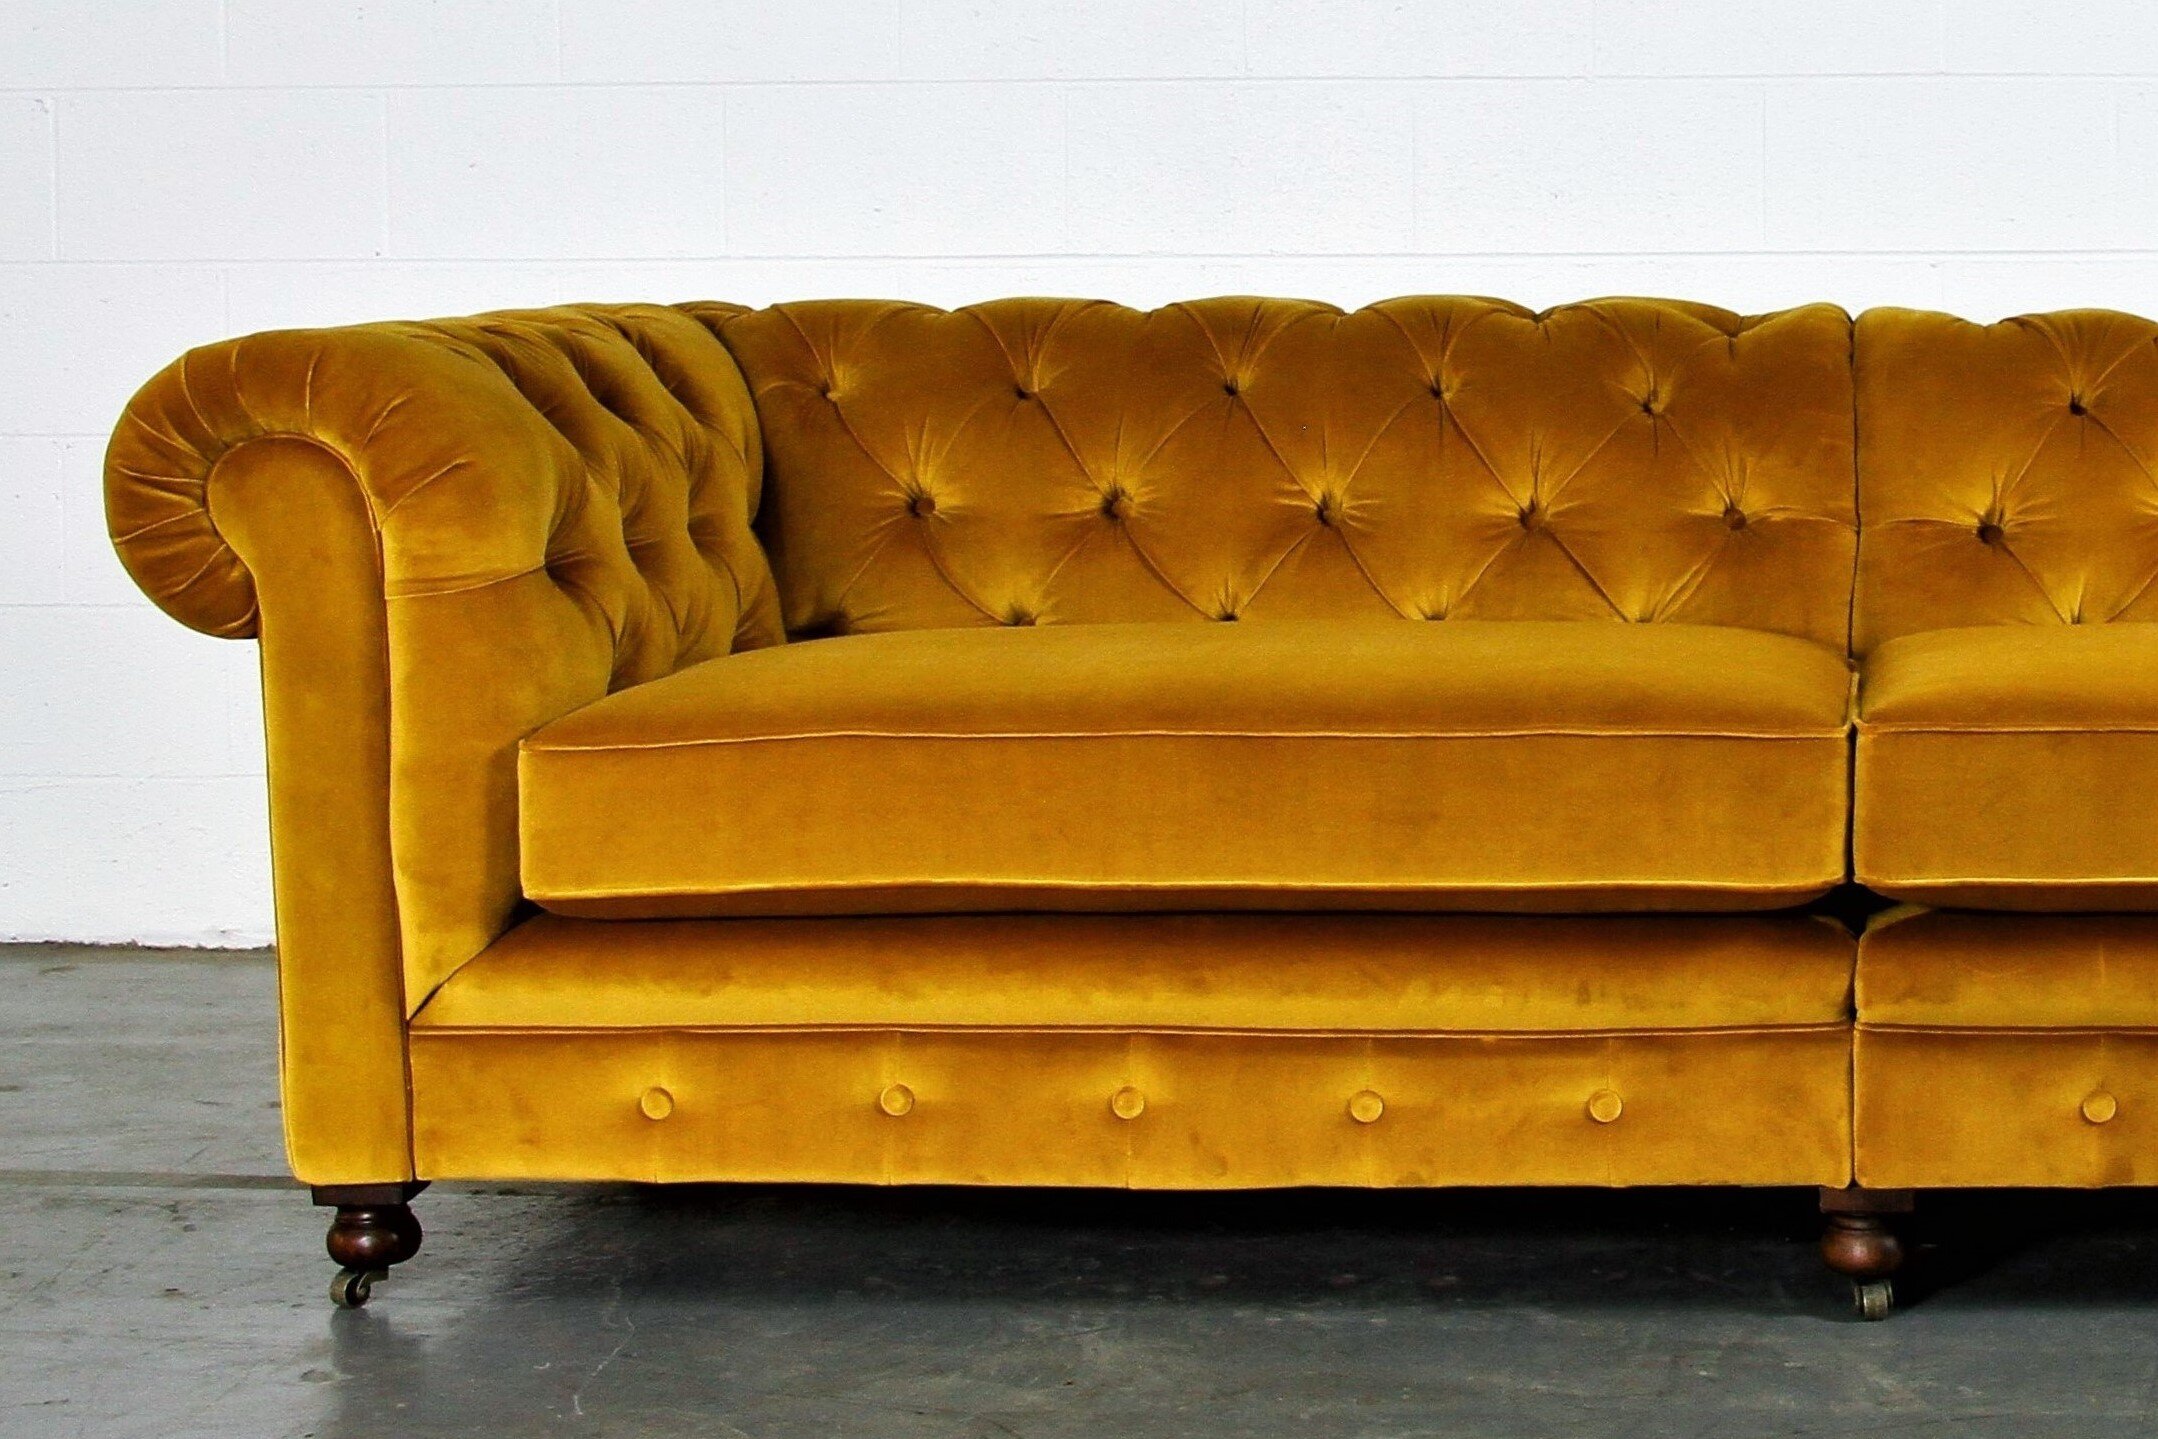 Corn Upholstery Fine Furniture, How To Reupholster A Chesterfield Sofa